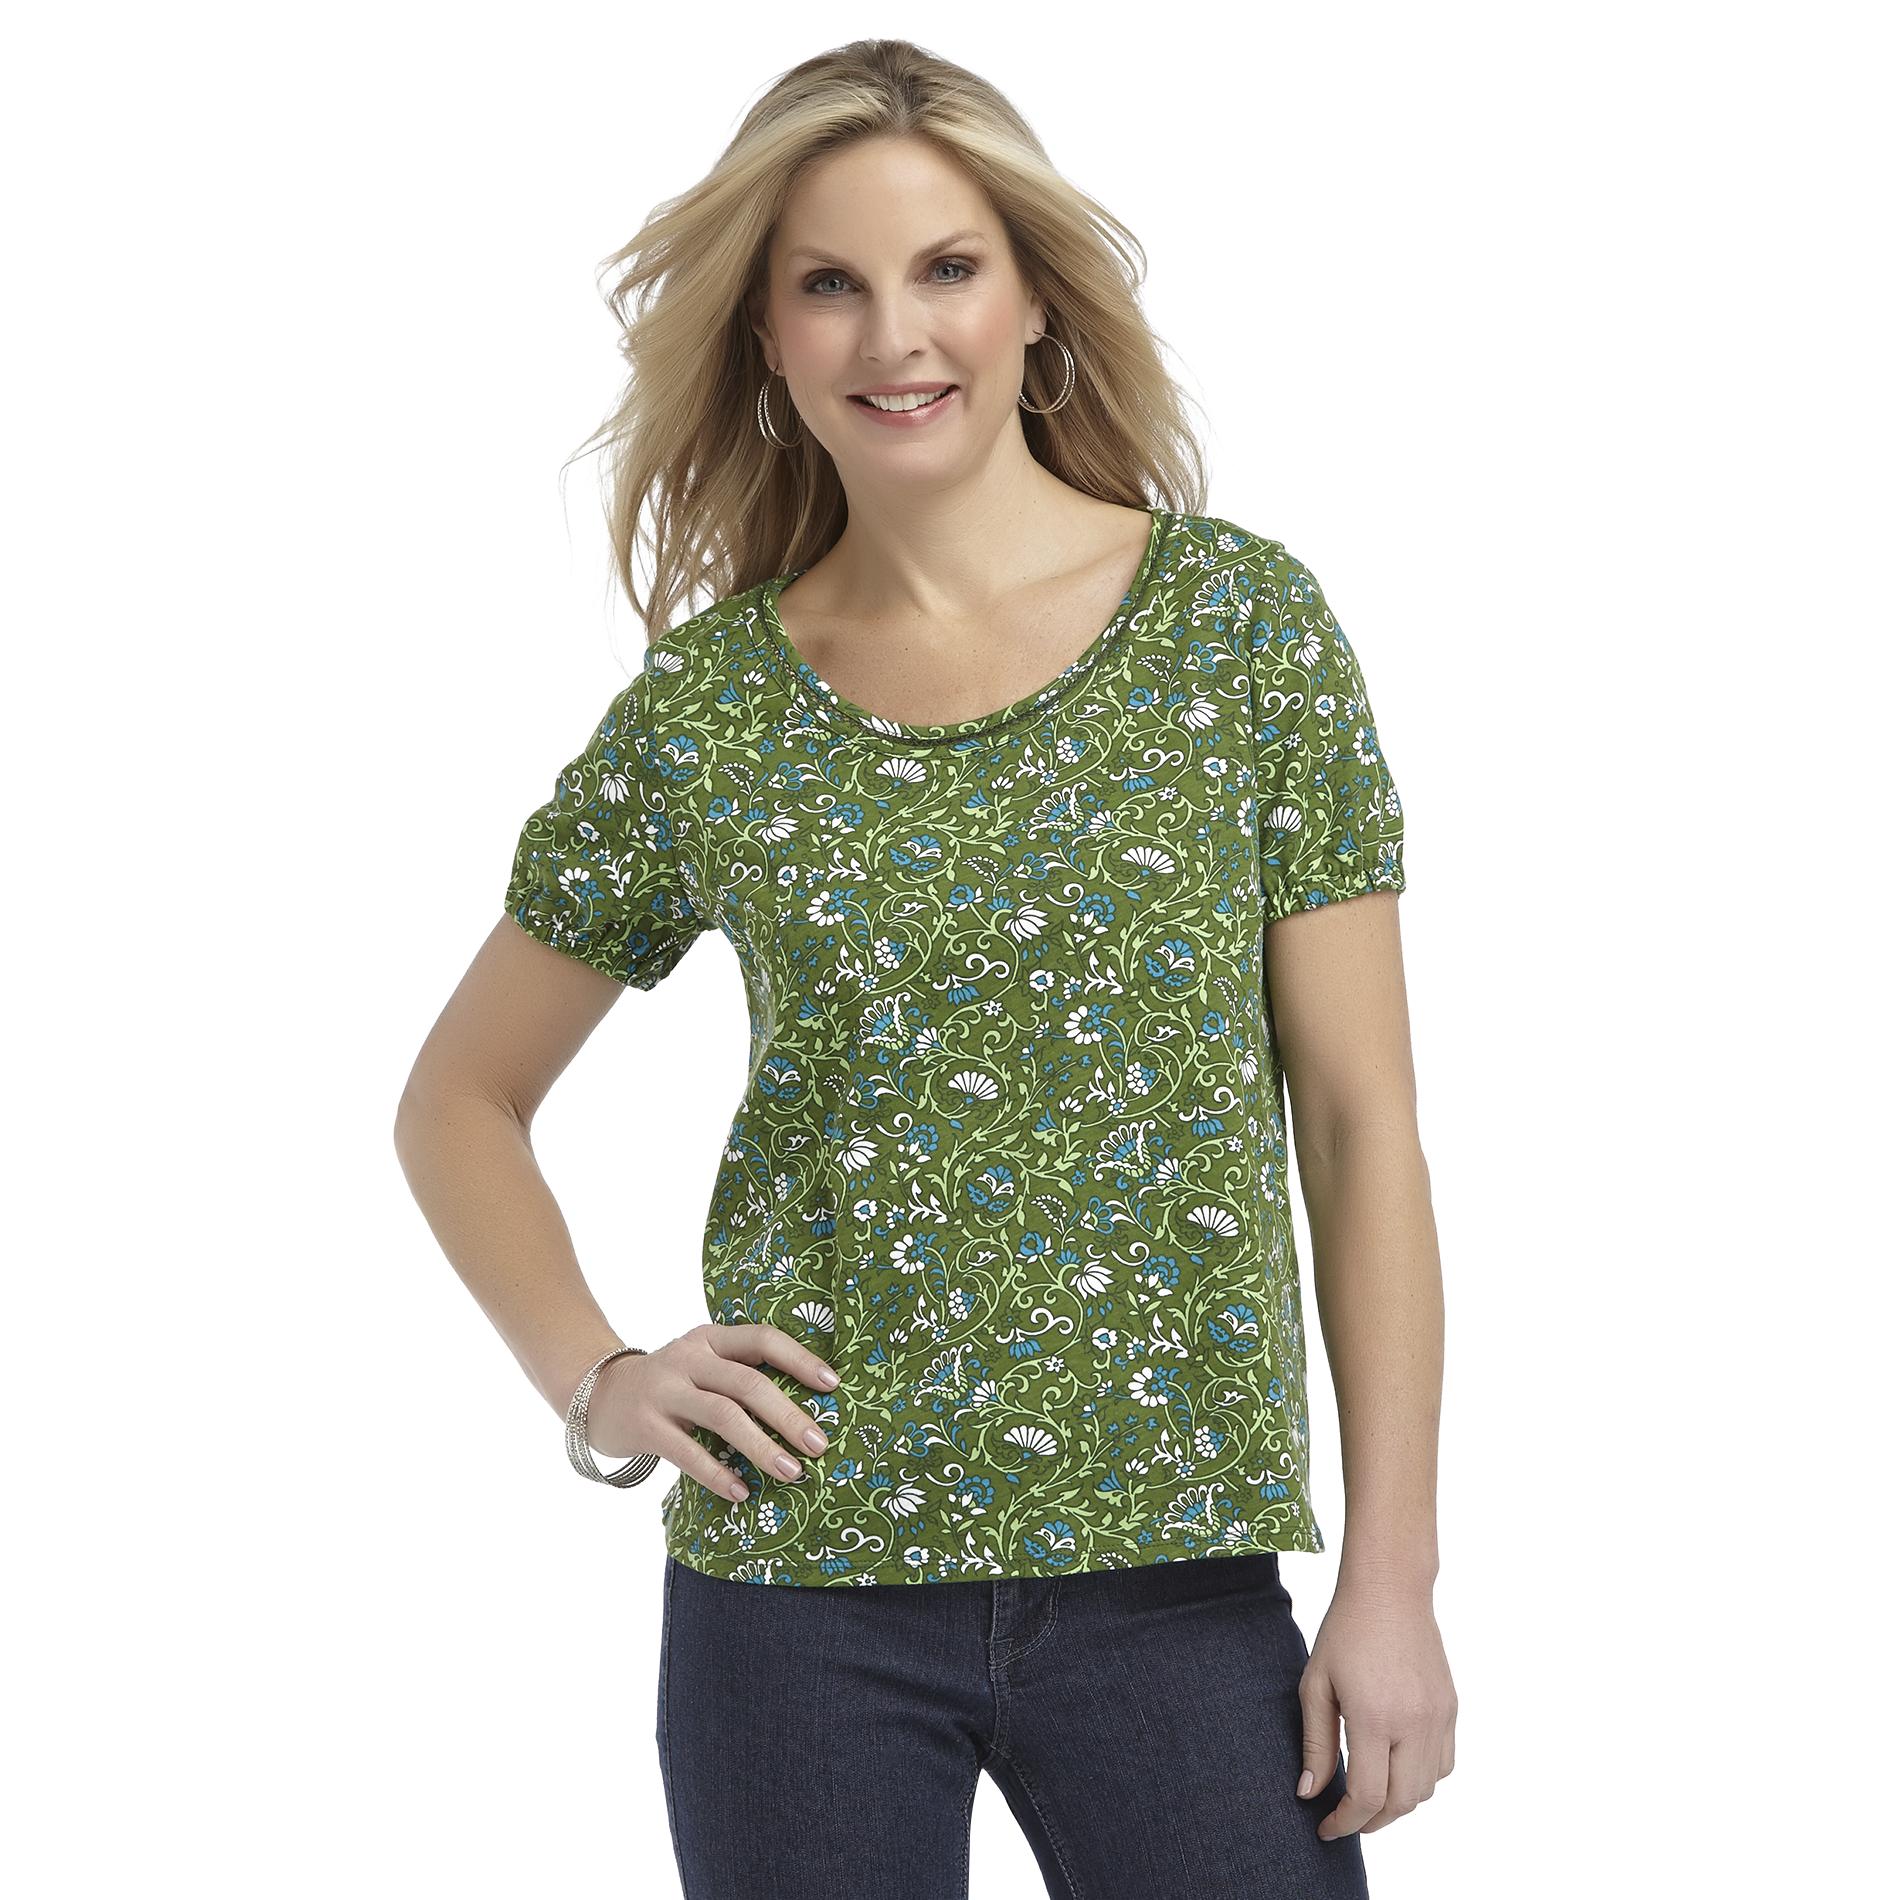 Basic Editions Women's Peasant Top - Floral Print